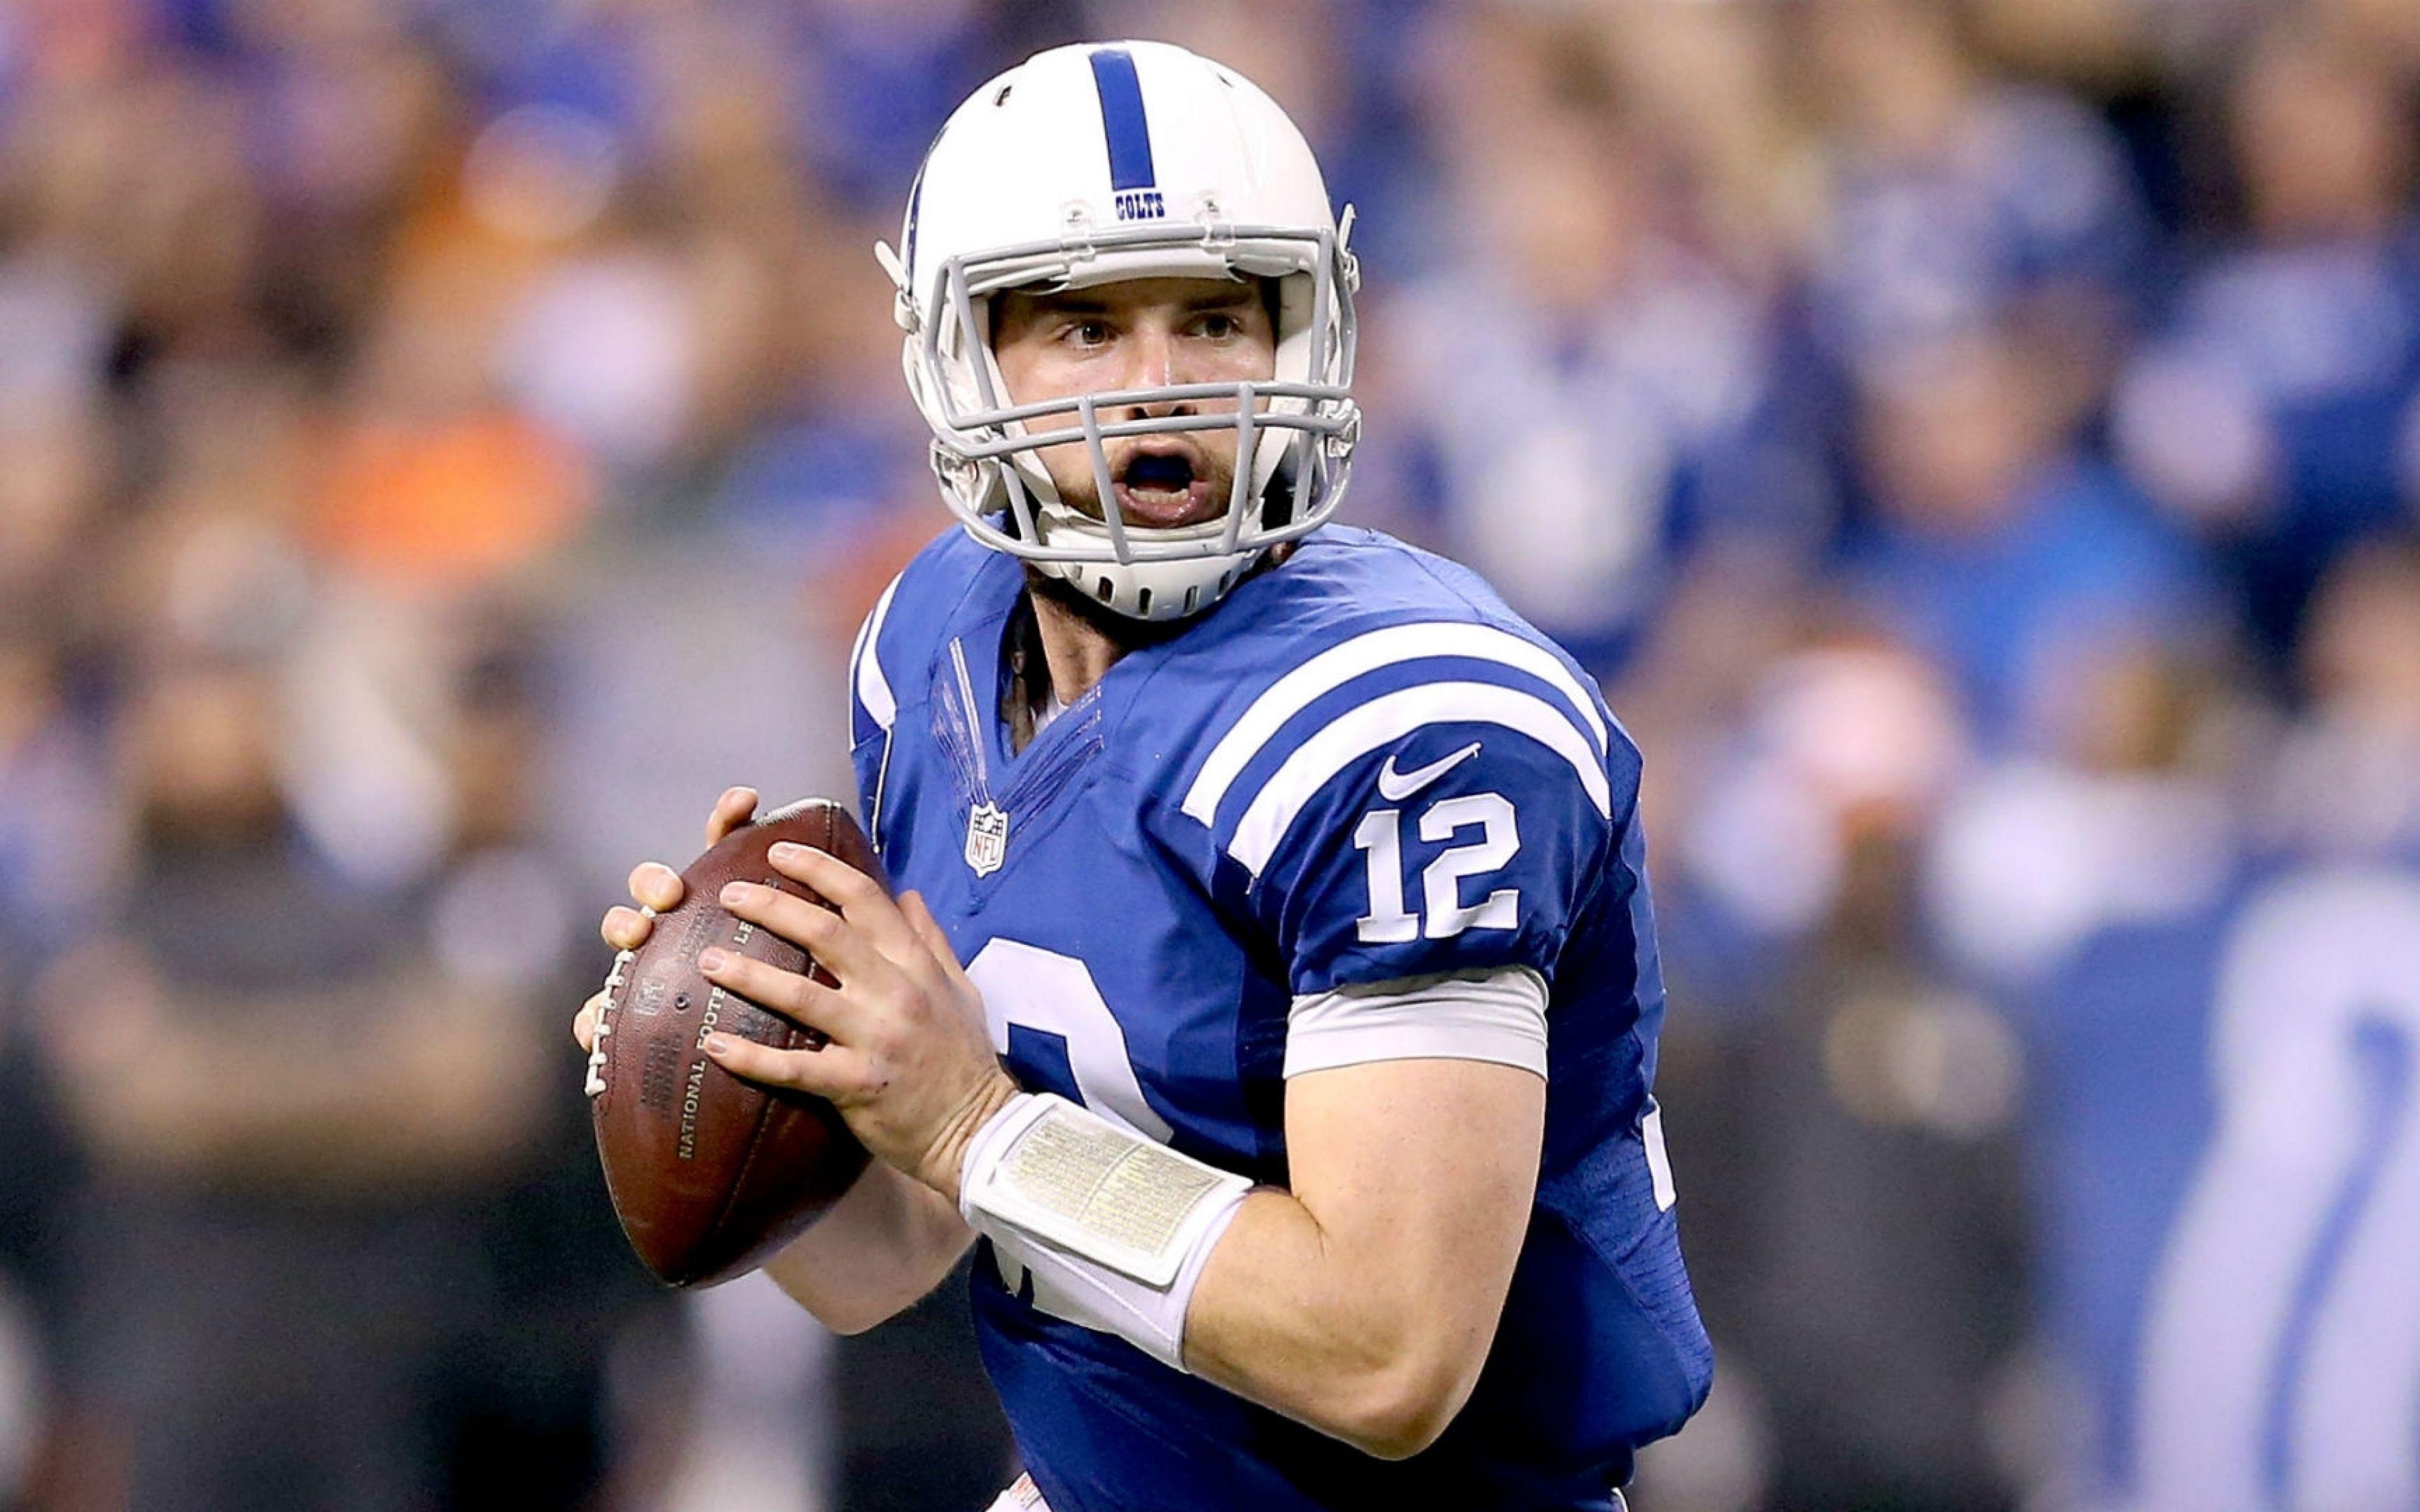 Download Wallpaper 3840x2400 Andrew luck, Indianapolis colts